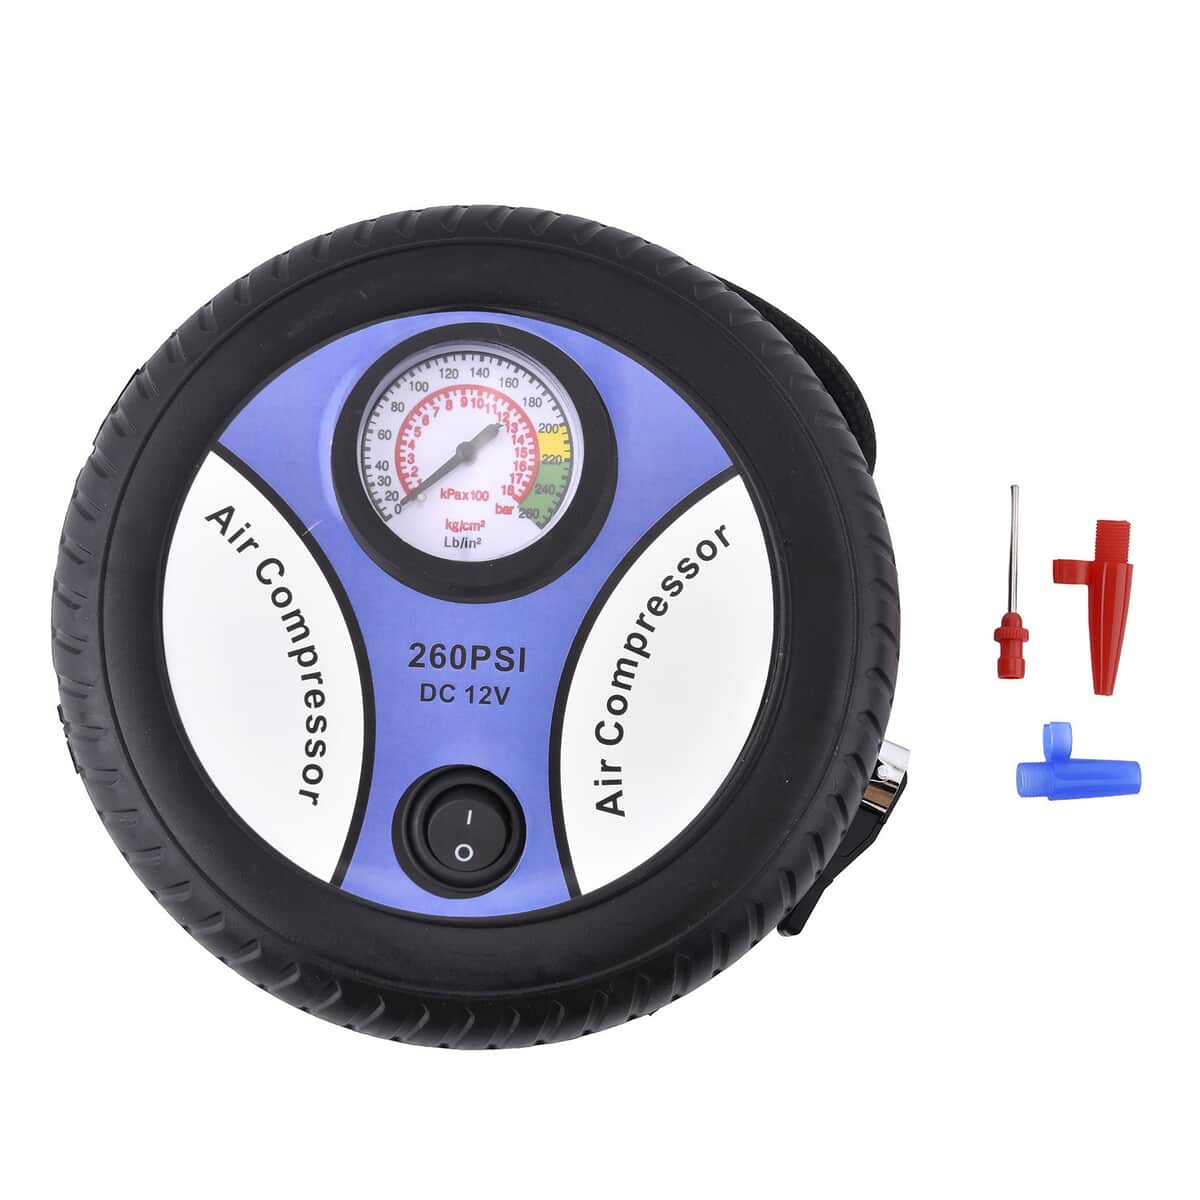 salon Donker worden Springen Buy Red Compact Portable Electric Mini DC 12V Air Compressor Tire Inflator  with 150 PSI Pressure Gauge Car Tire Pump at ShopLC.